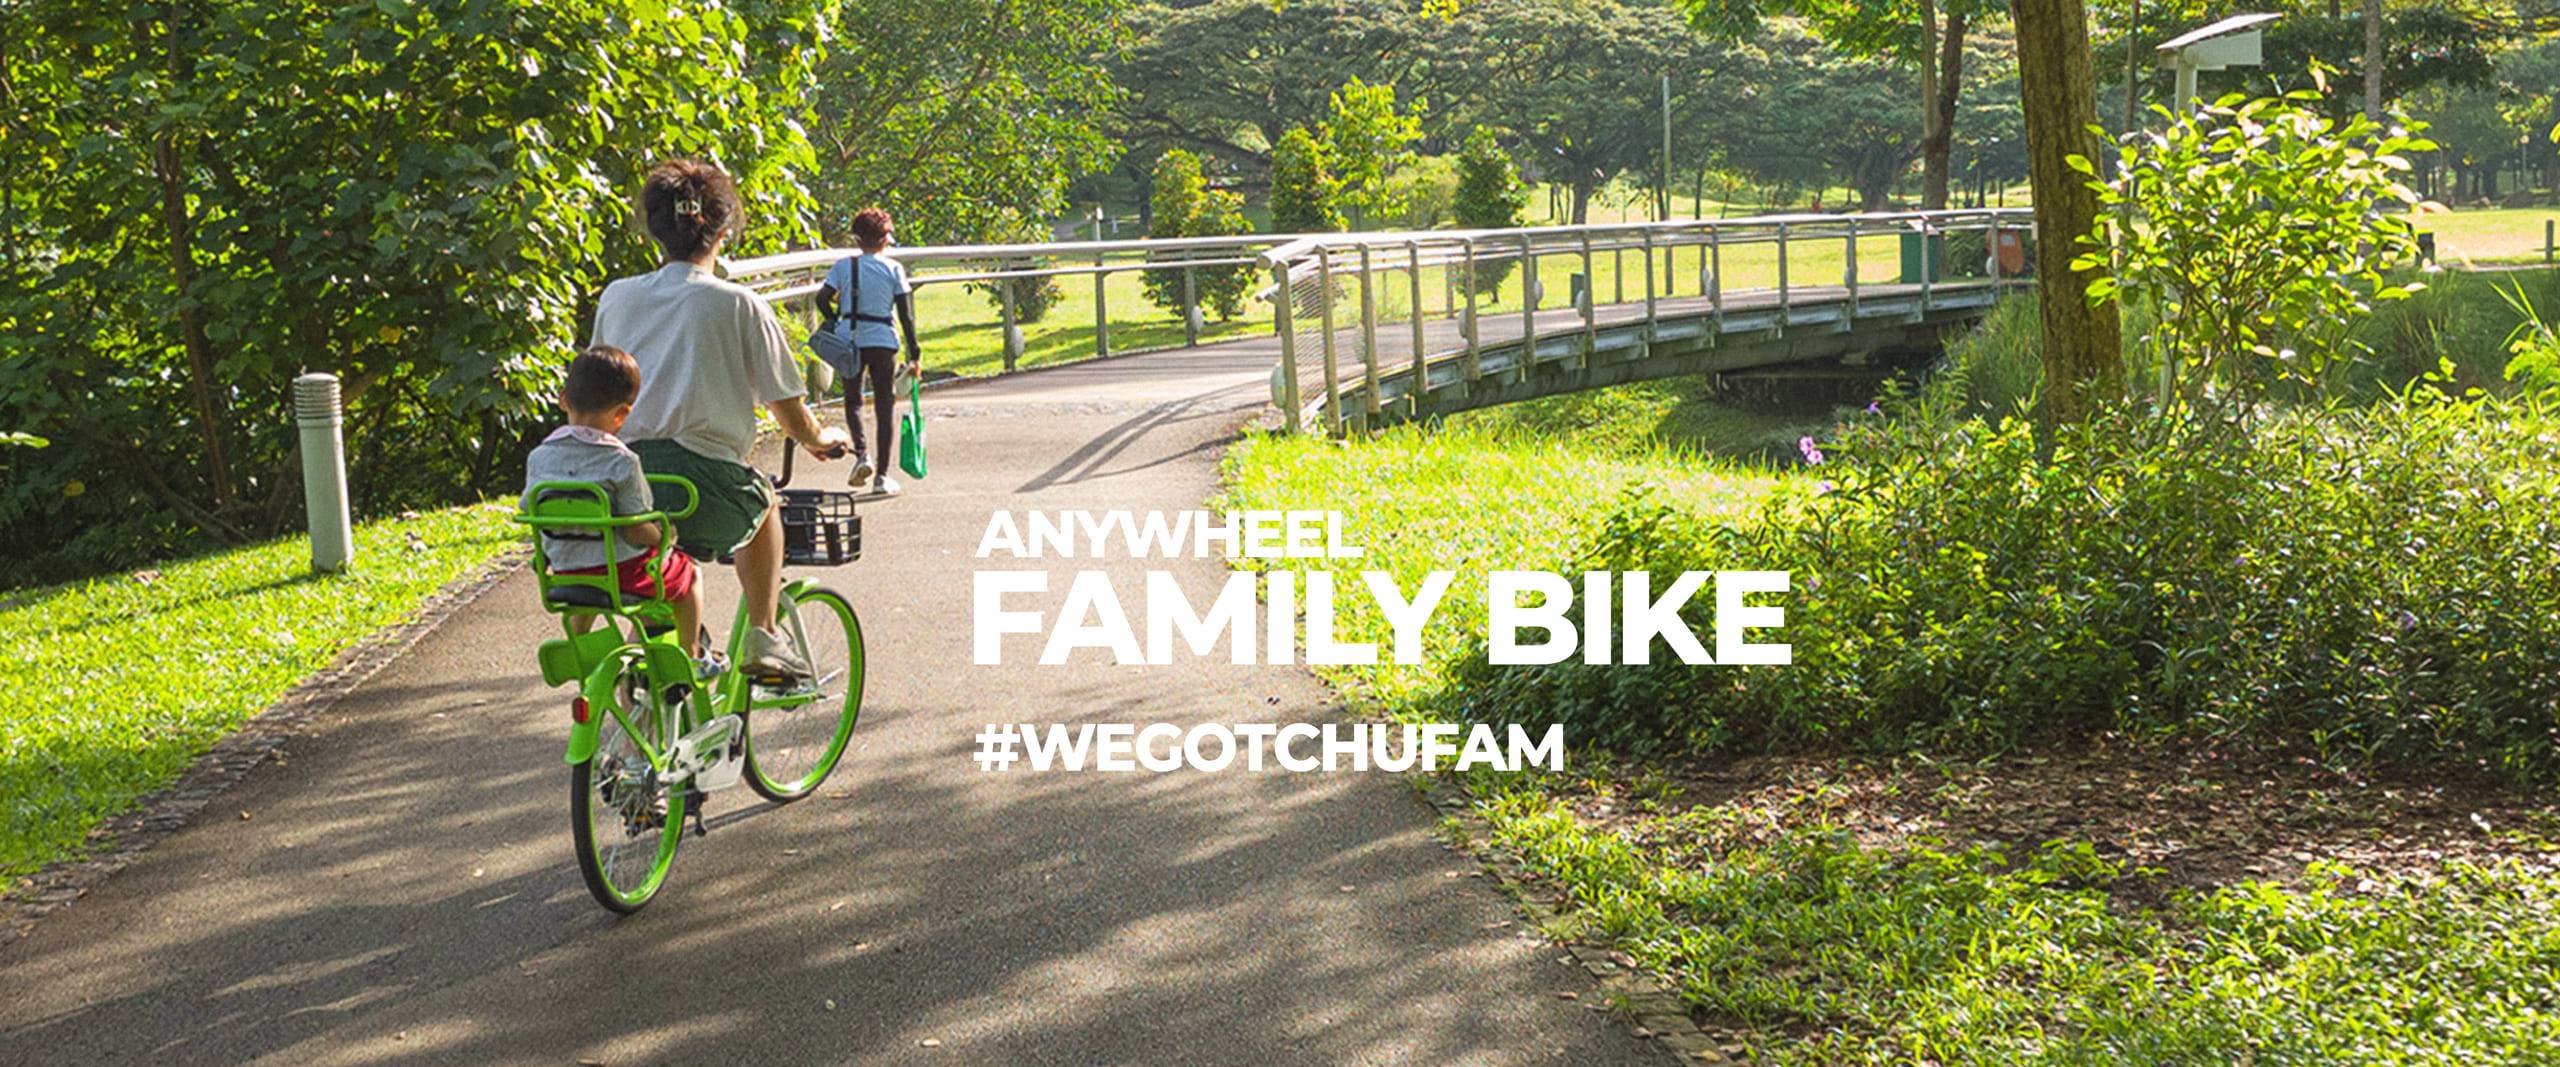 Anywheel_Us - -Devices-Family-Bike